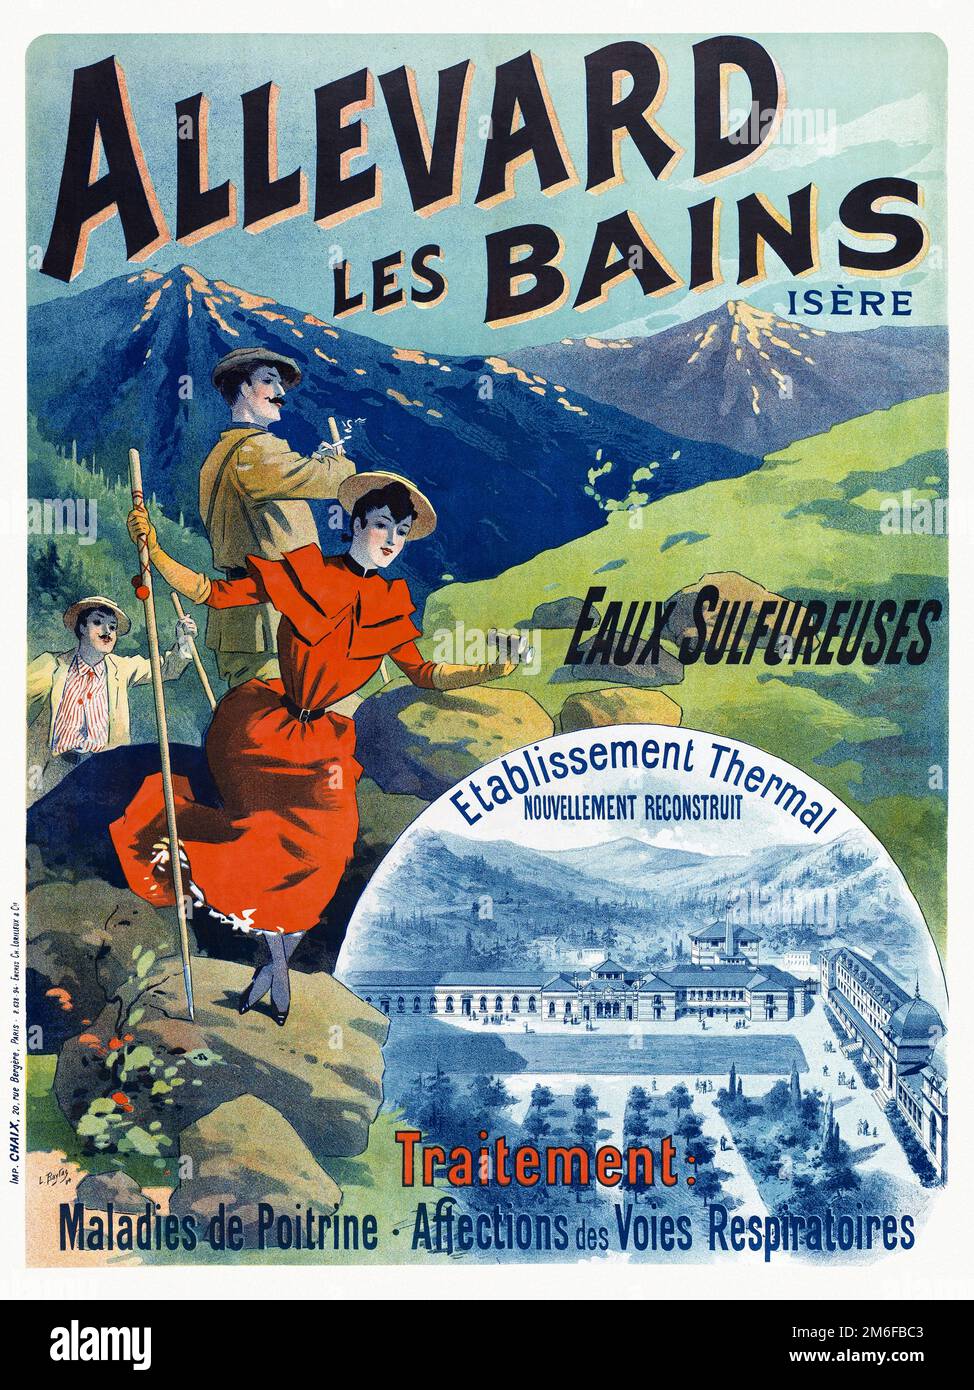 Allevard les Bains, Isère by Lucien Baylac (1851-1911). Poster published in 1894 in France. Stock Photo